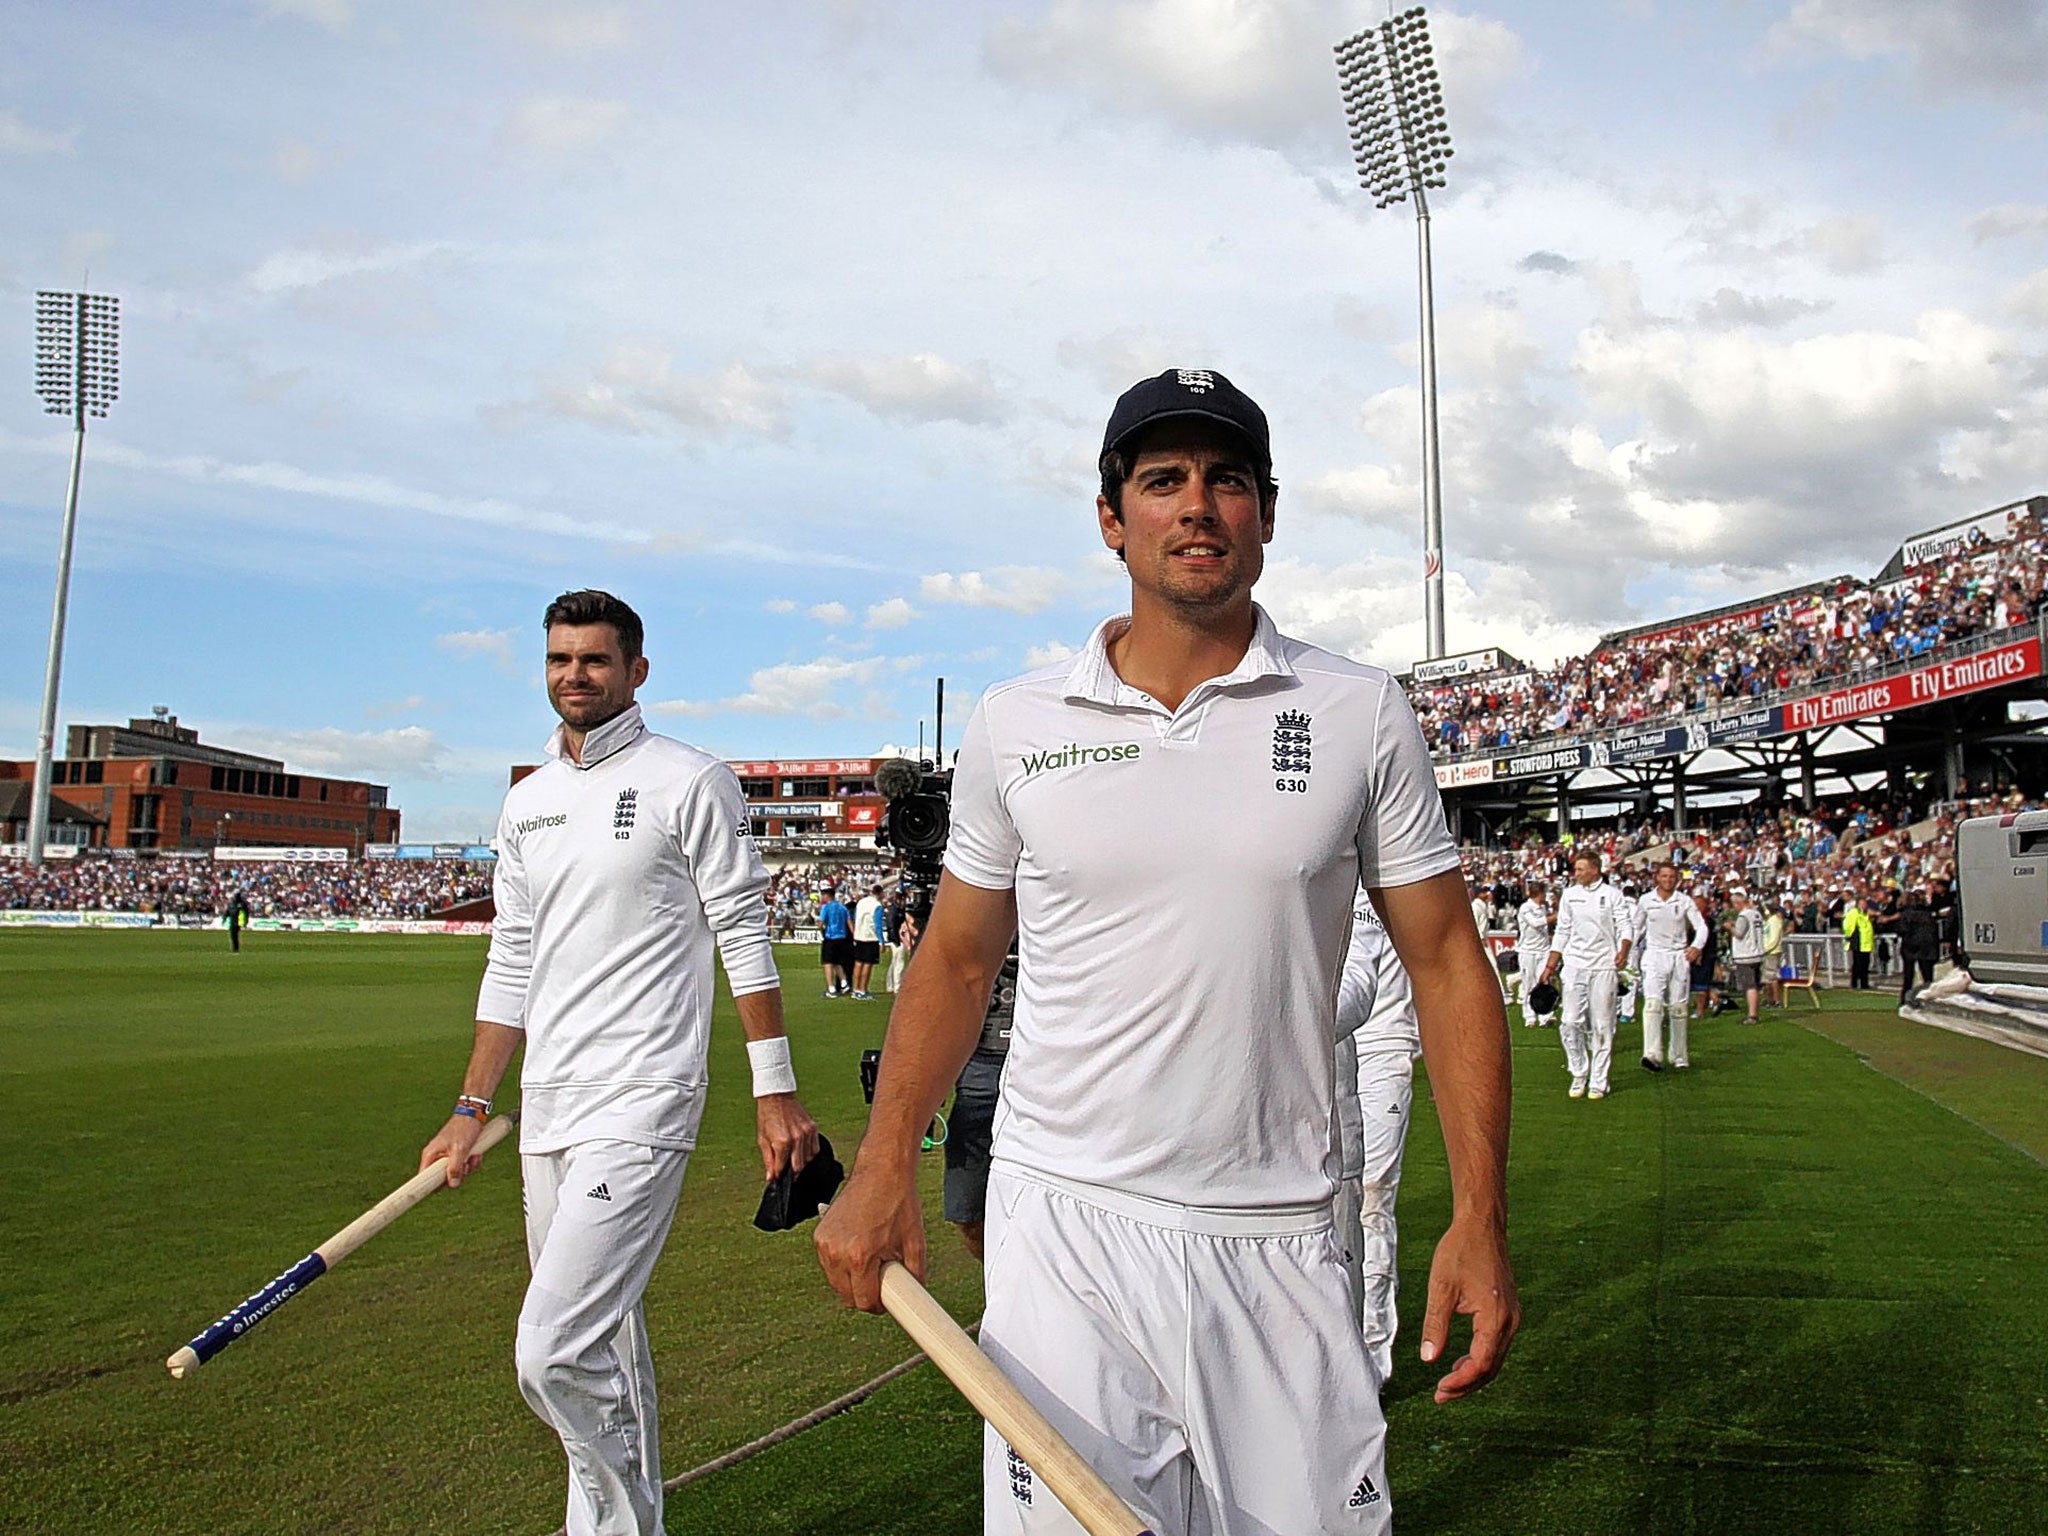 Alastair Cook takes the applause after Saturday’s remarkable win over India at Old Trafford